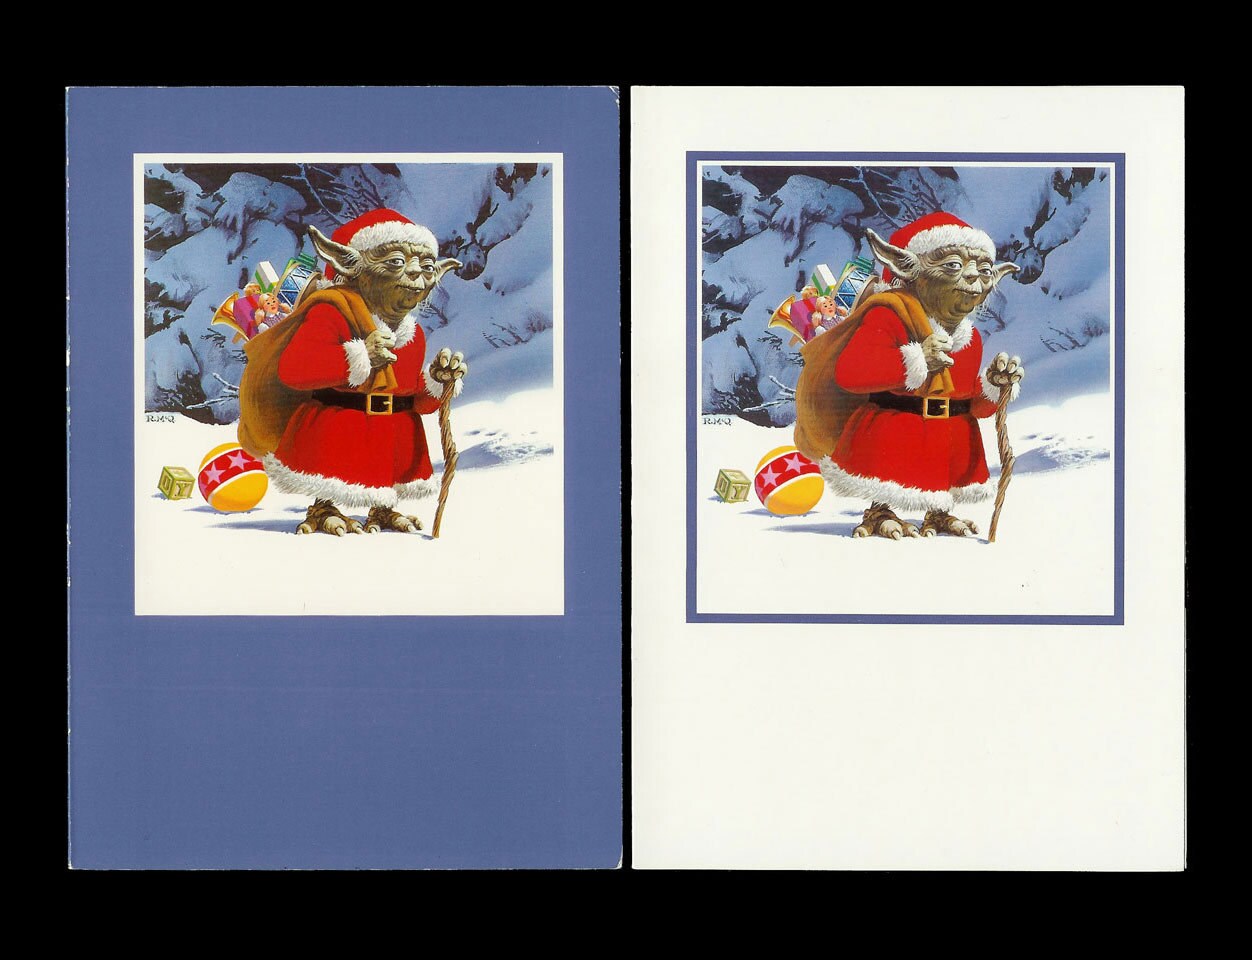 Two images of Yoda in a Santa Claus outfit and different colored backgrounds.